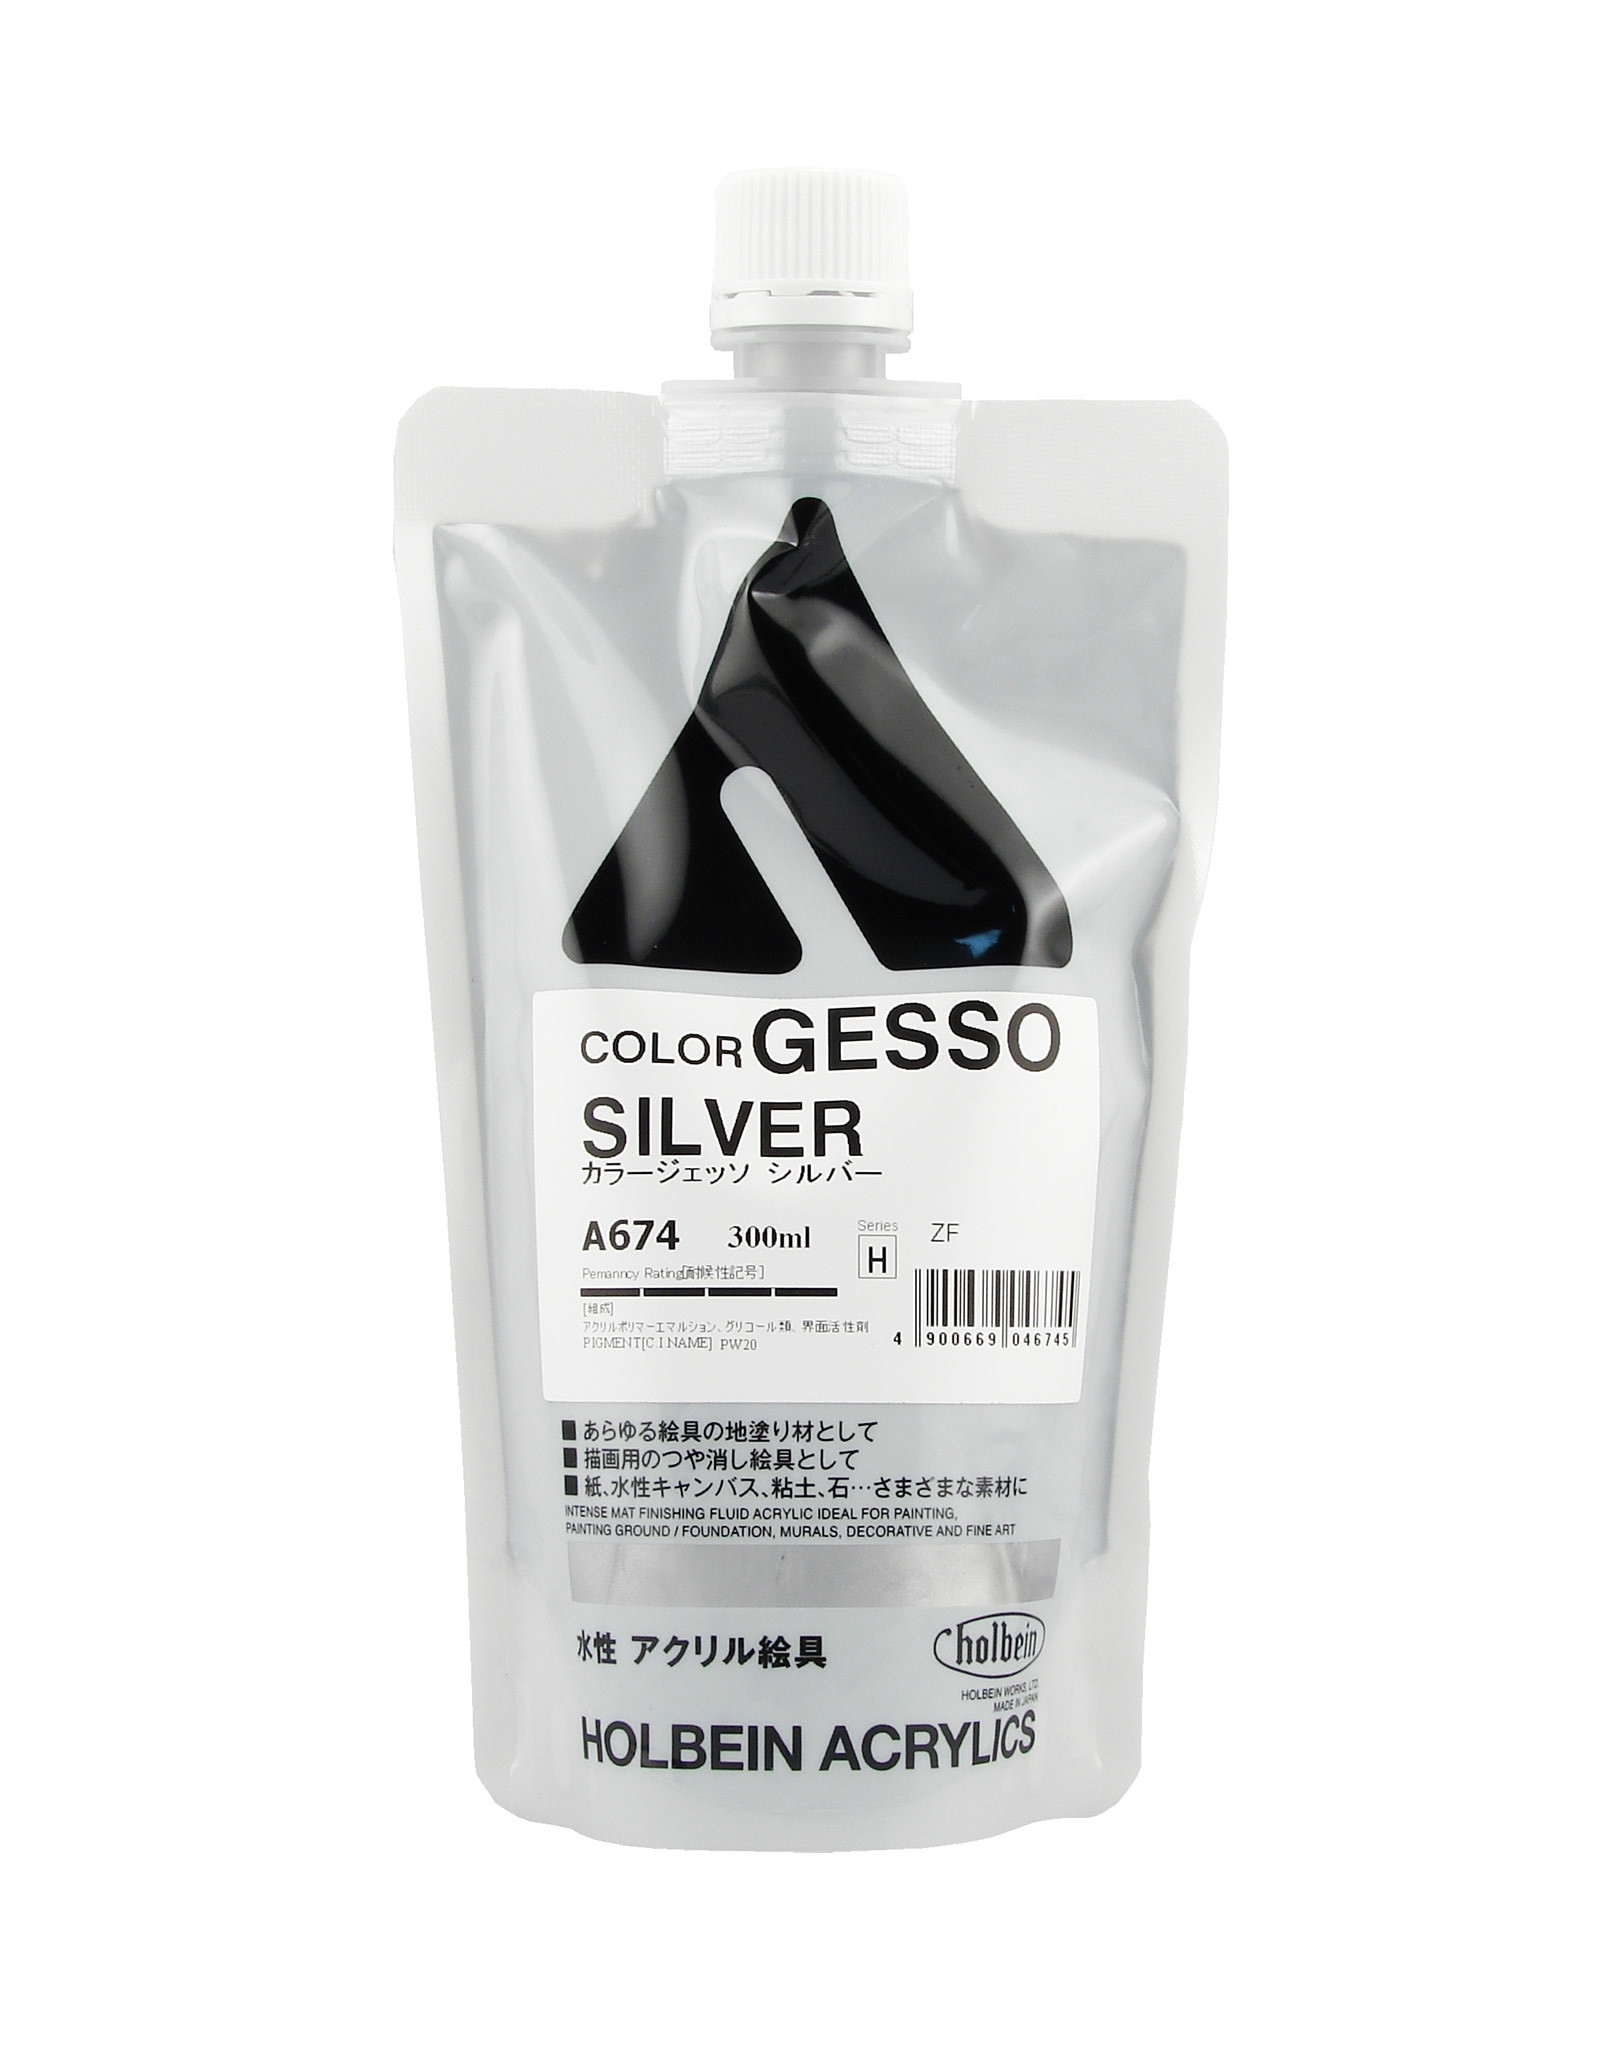 CLEARANCE Holbein GESSO Silver 300ml bag